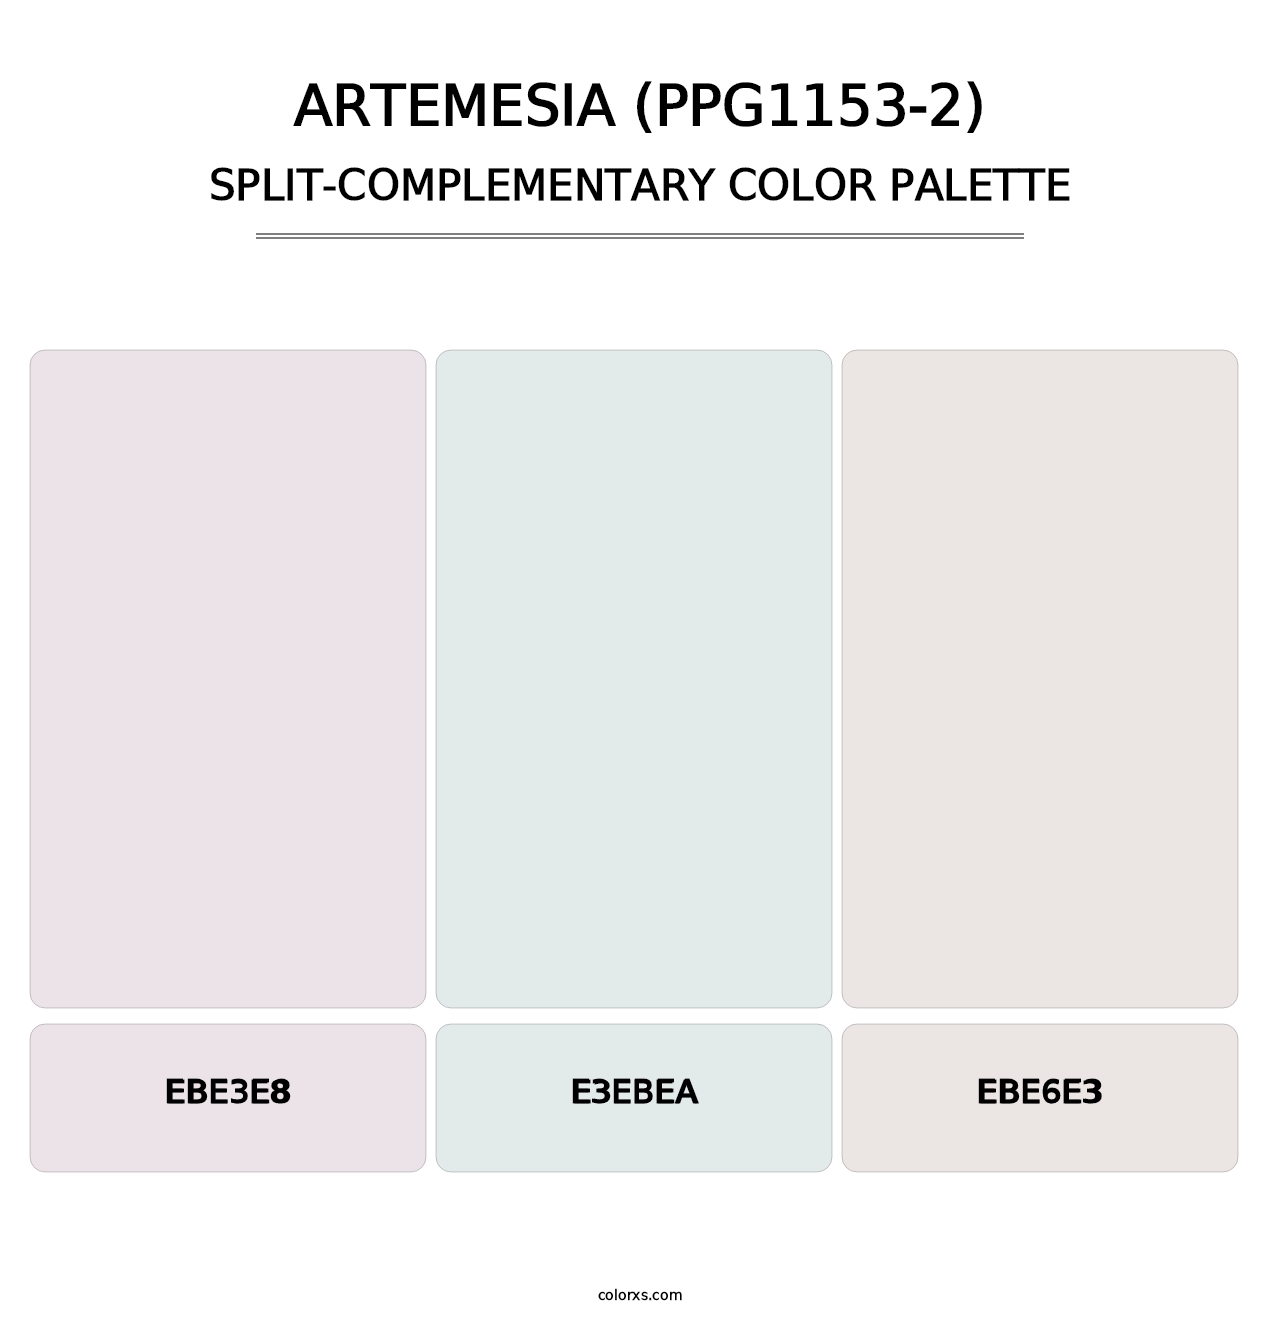 Artemesia (PPG1153-2) - Split-Complementary Color Palette